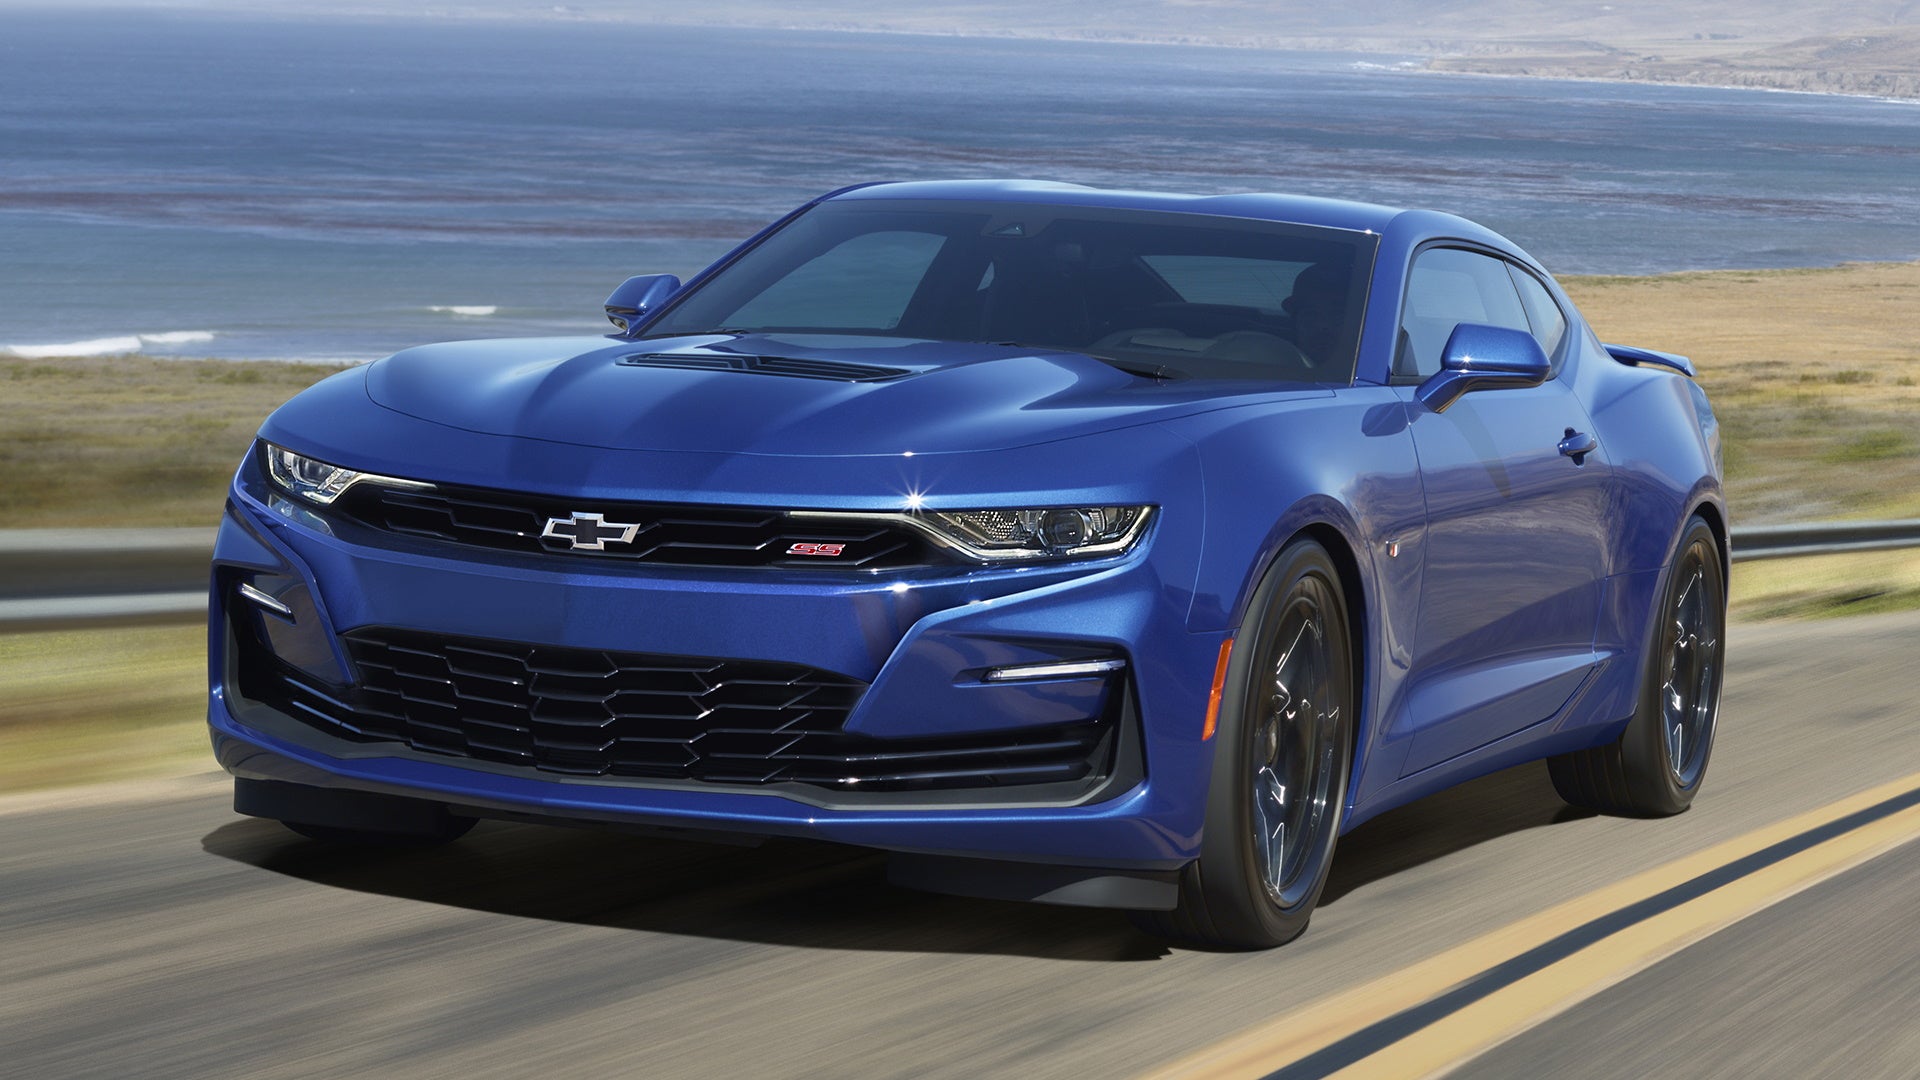 All Chevy Camaro Production Stops Due to Chip Shortage